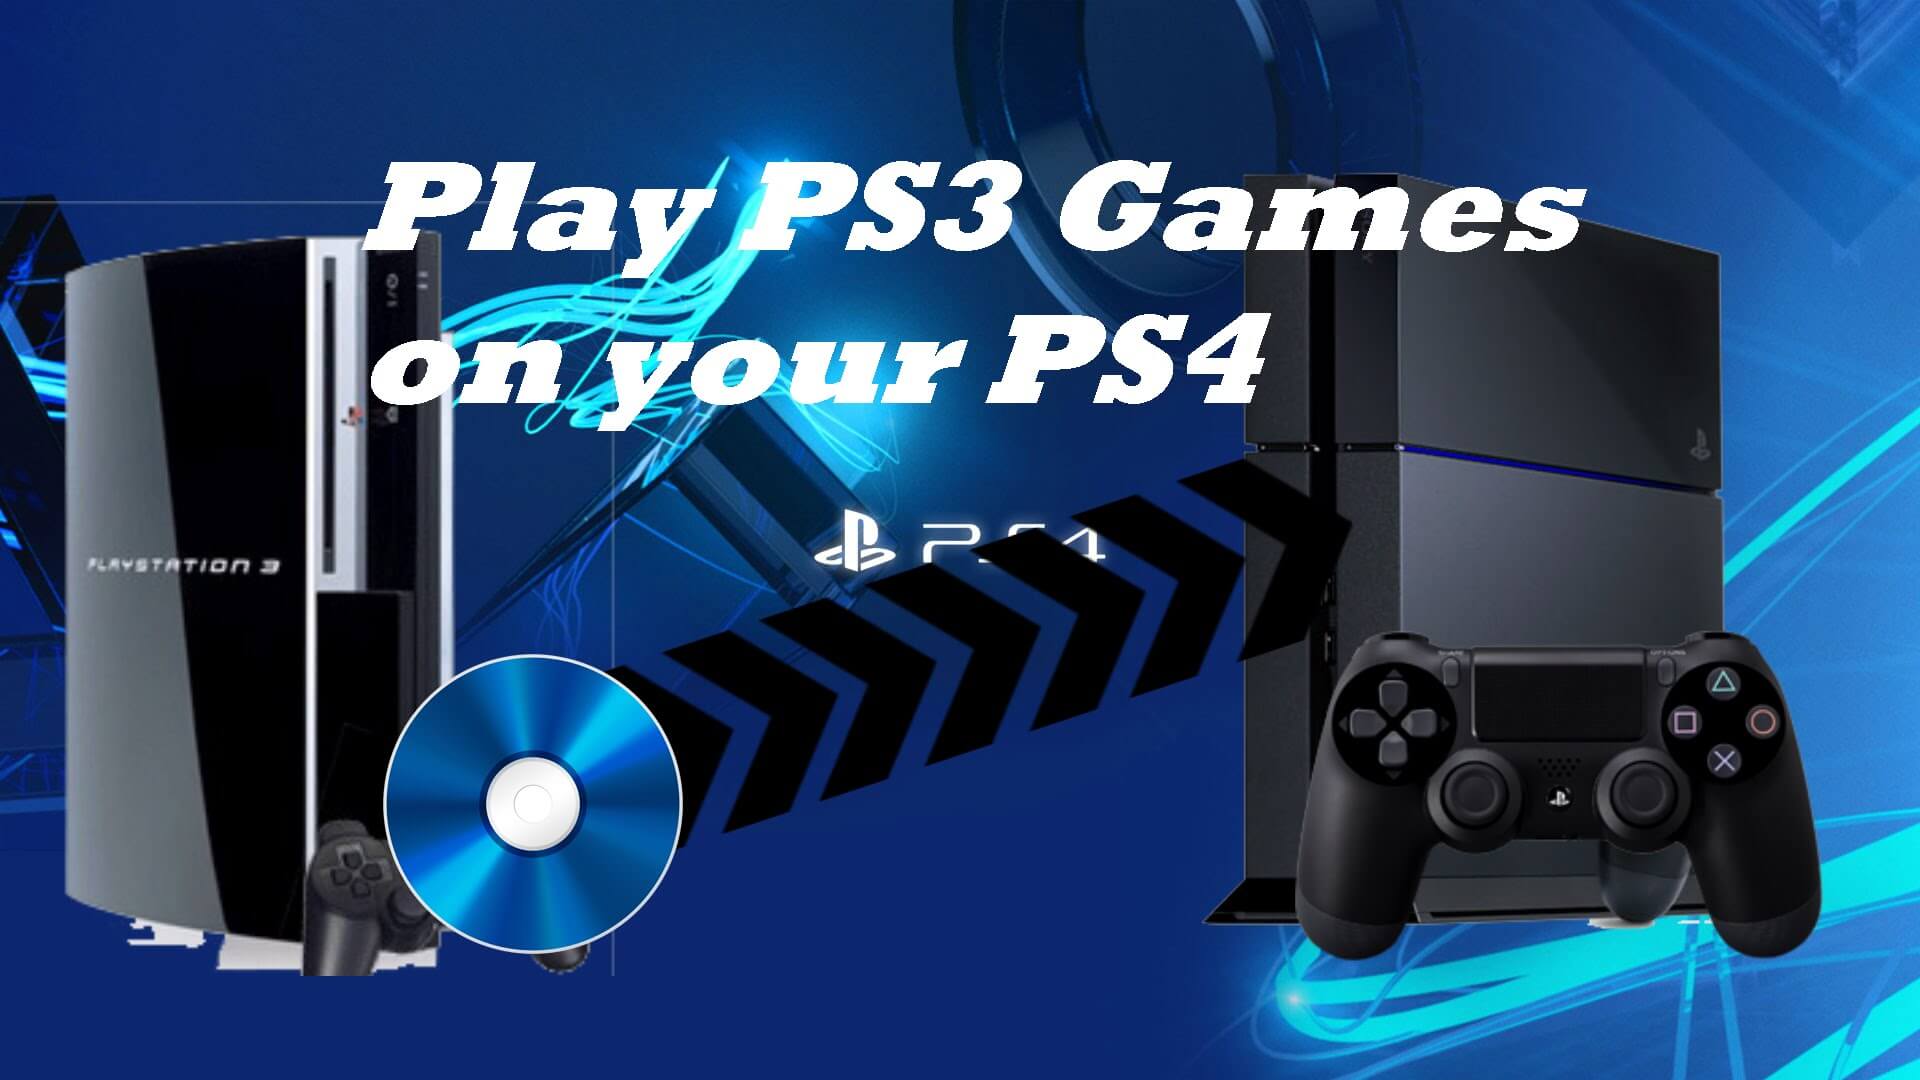 ps3 games on ps4